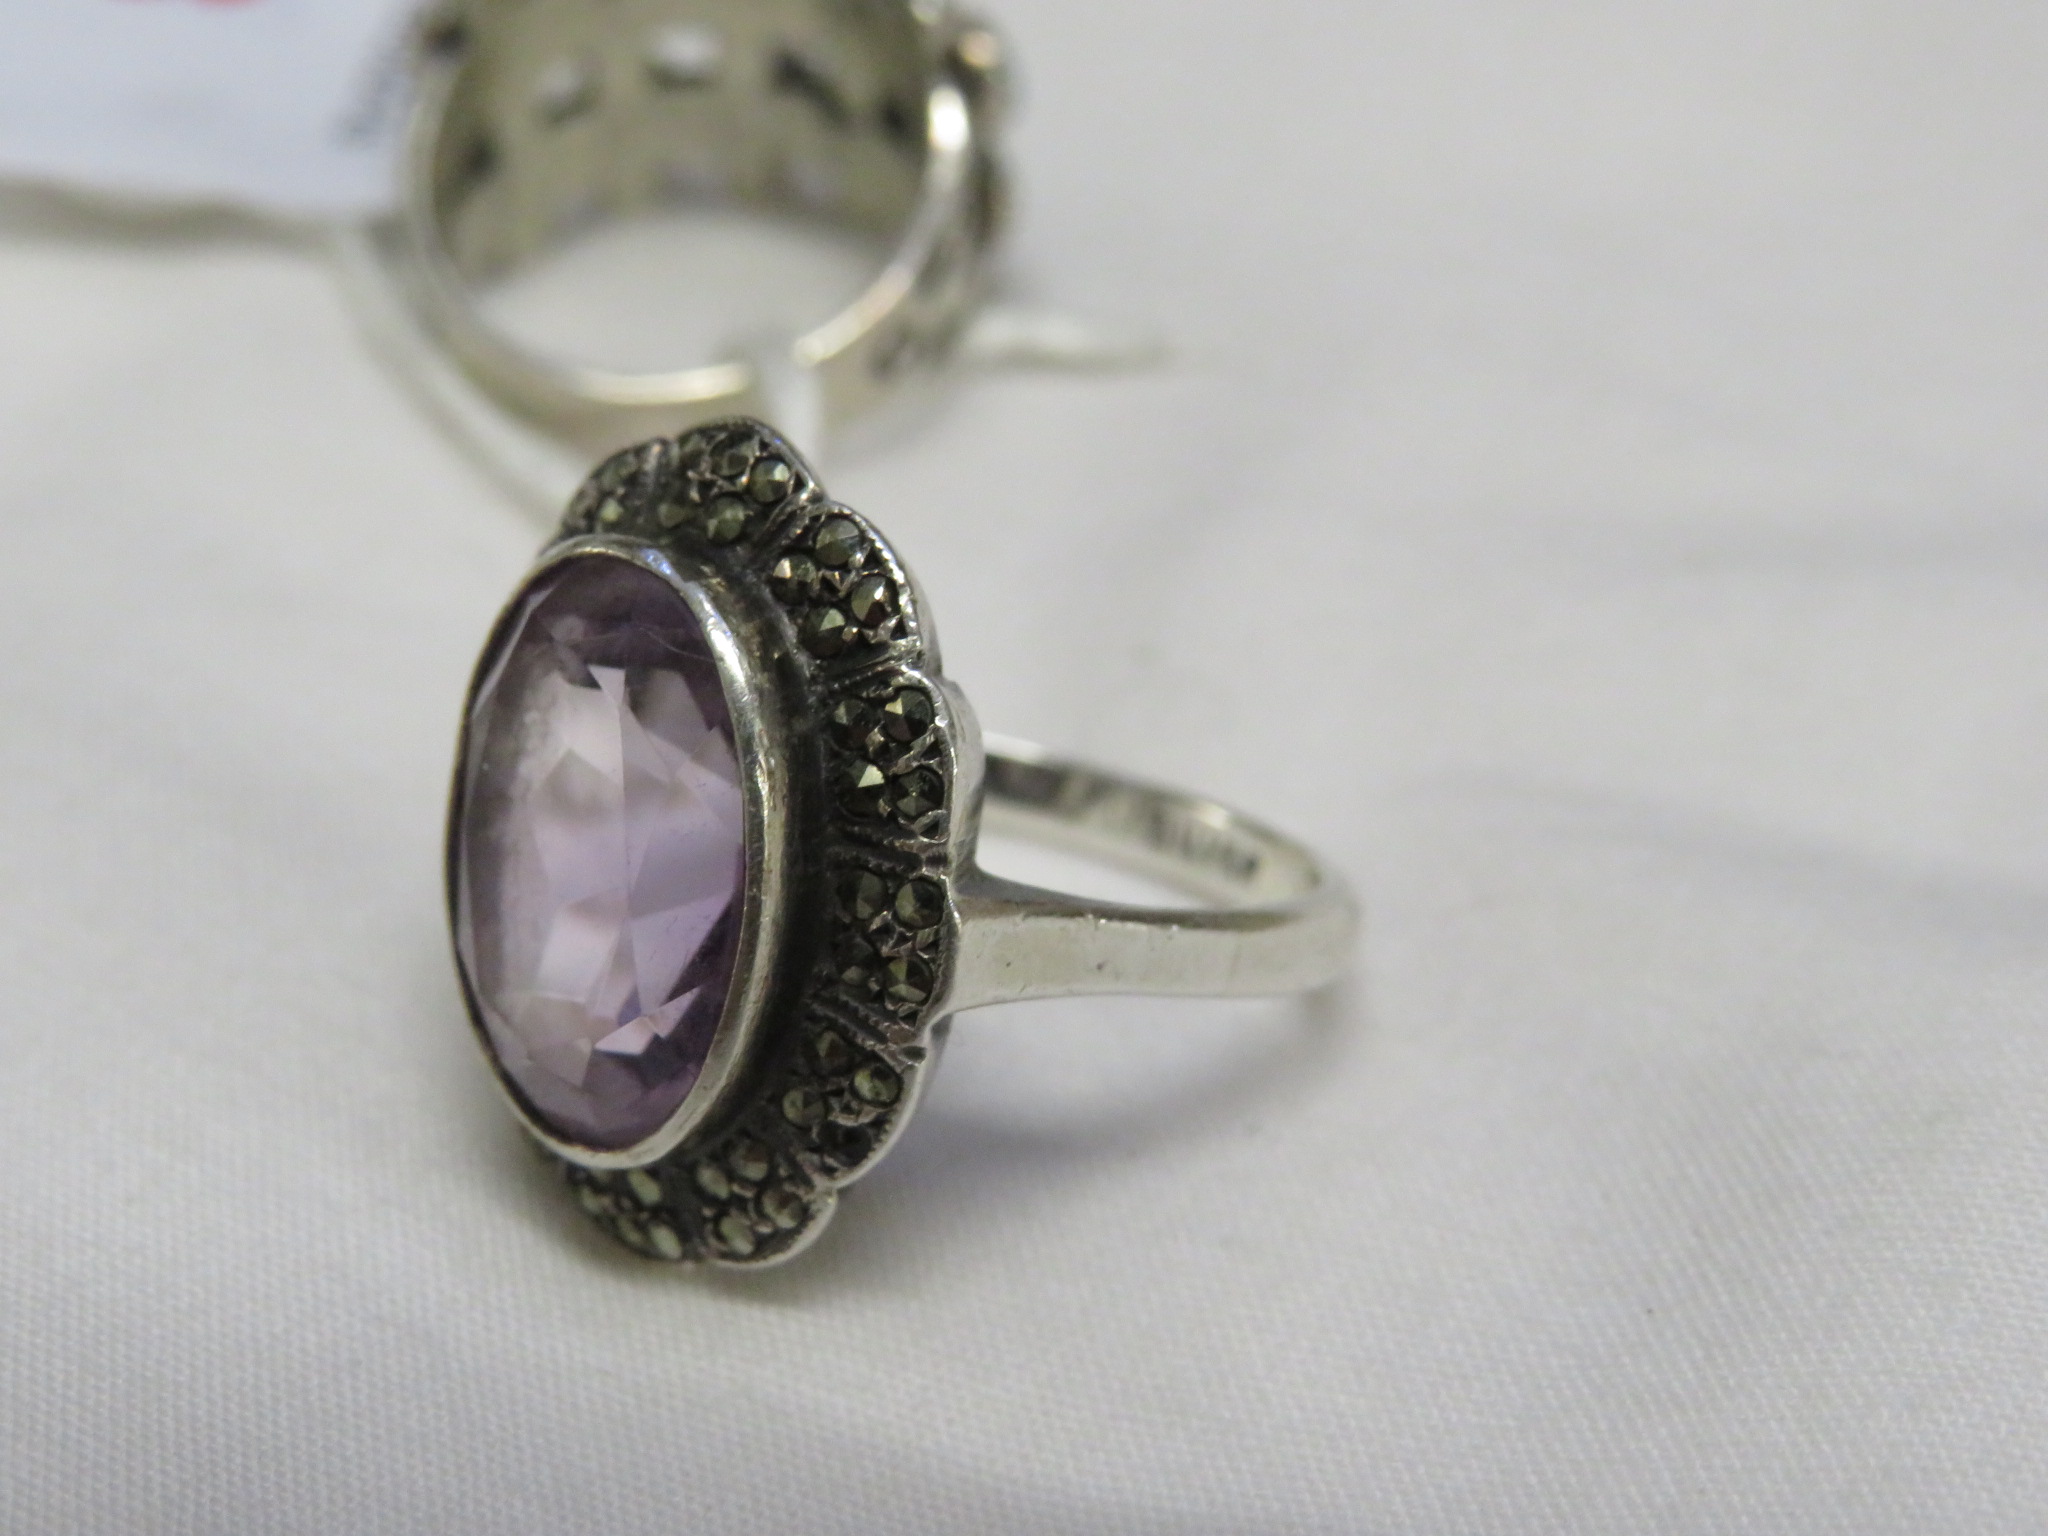 WHITE METAL RING SET WITH TURQUOISE AND STAMPED STERLING, AND A WHITE METAL AMETHYST AND MARCASITE - Image 3 of 3